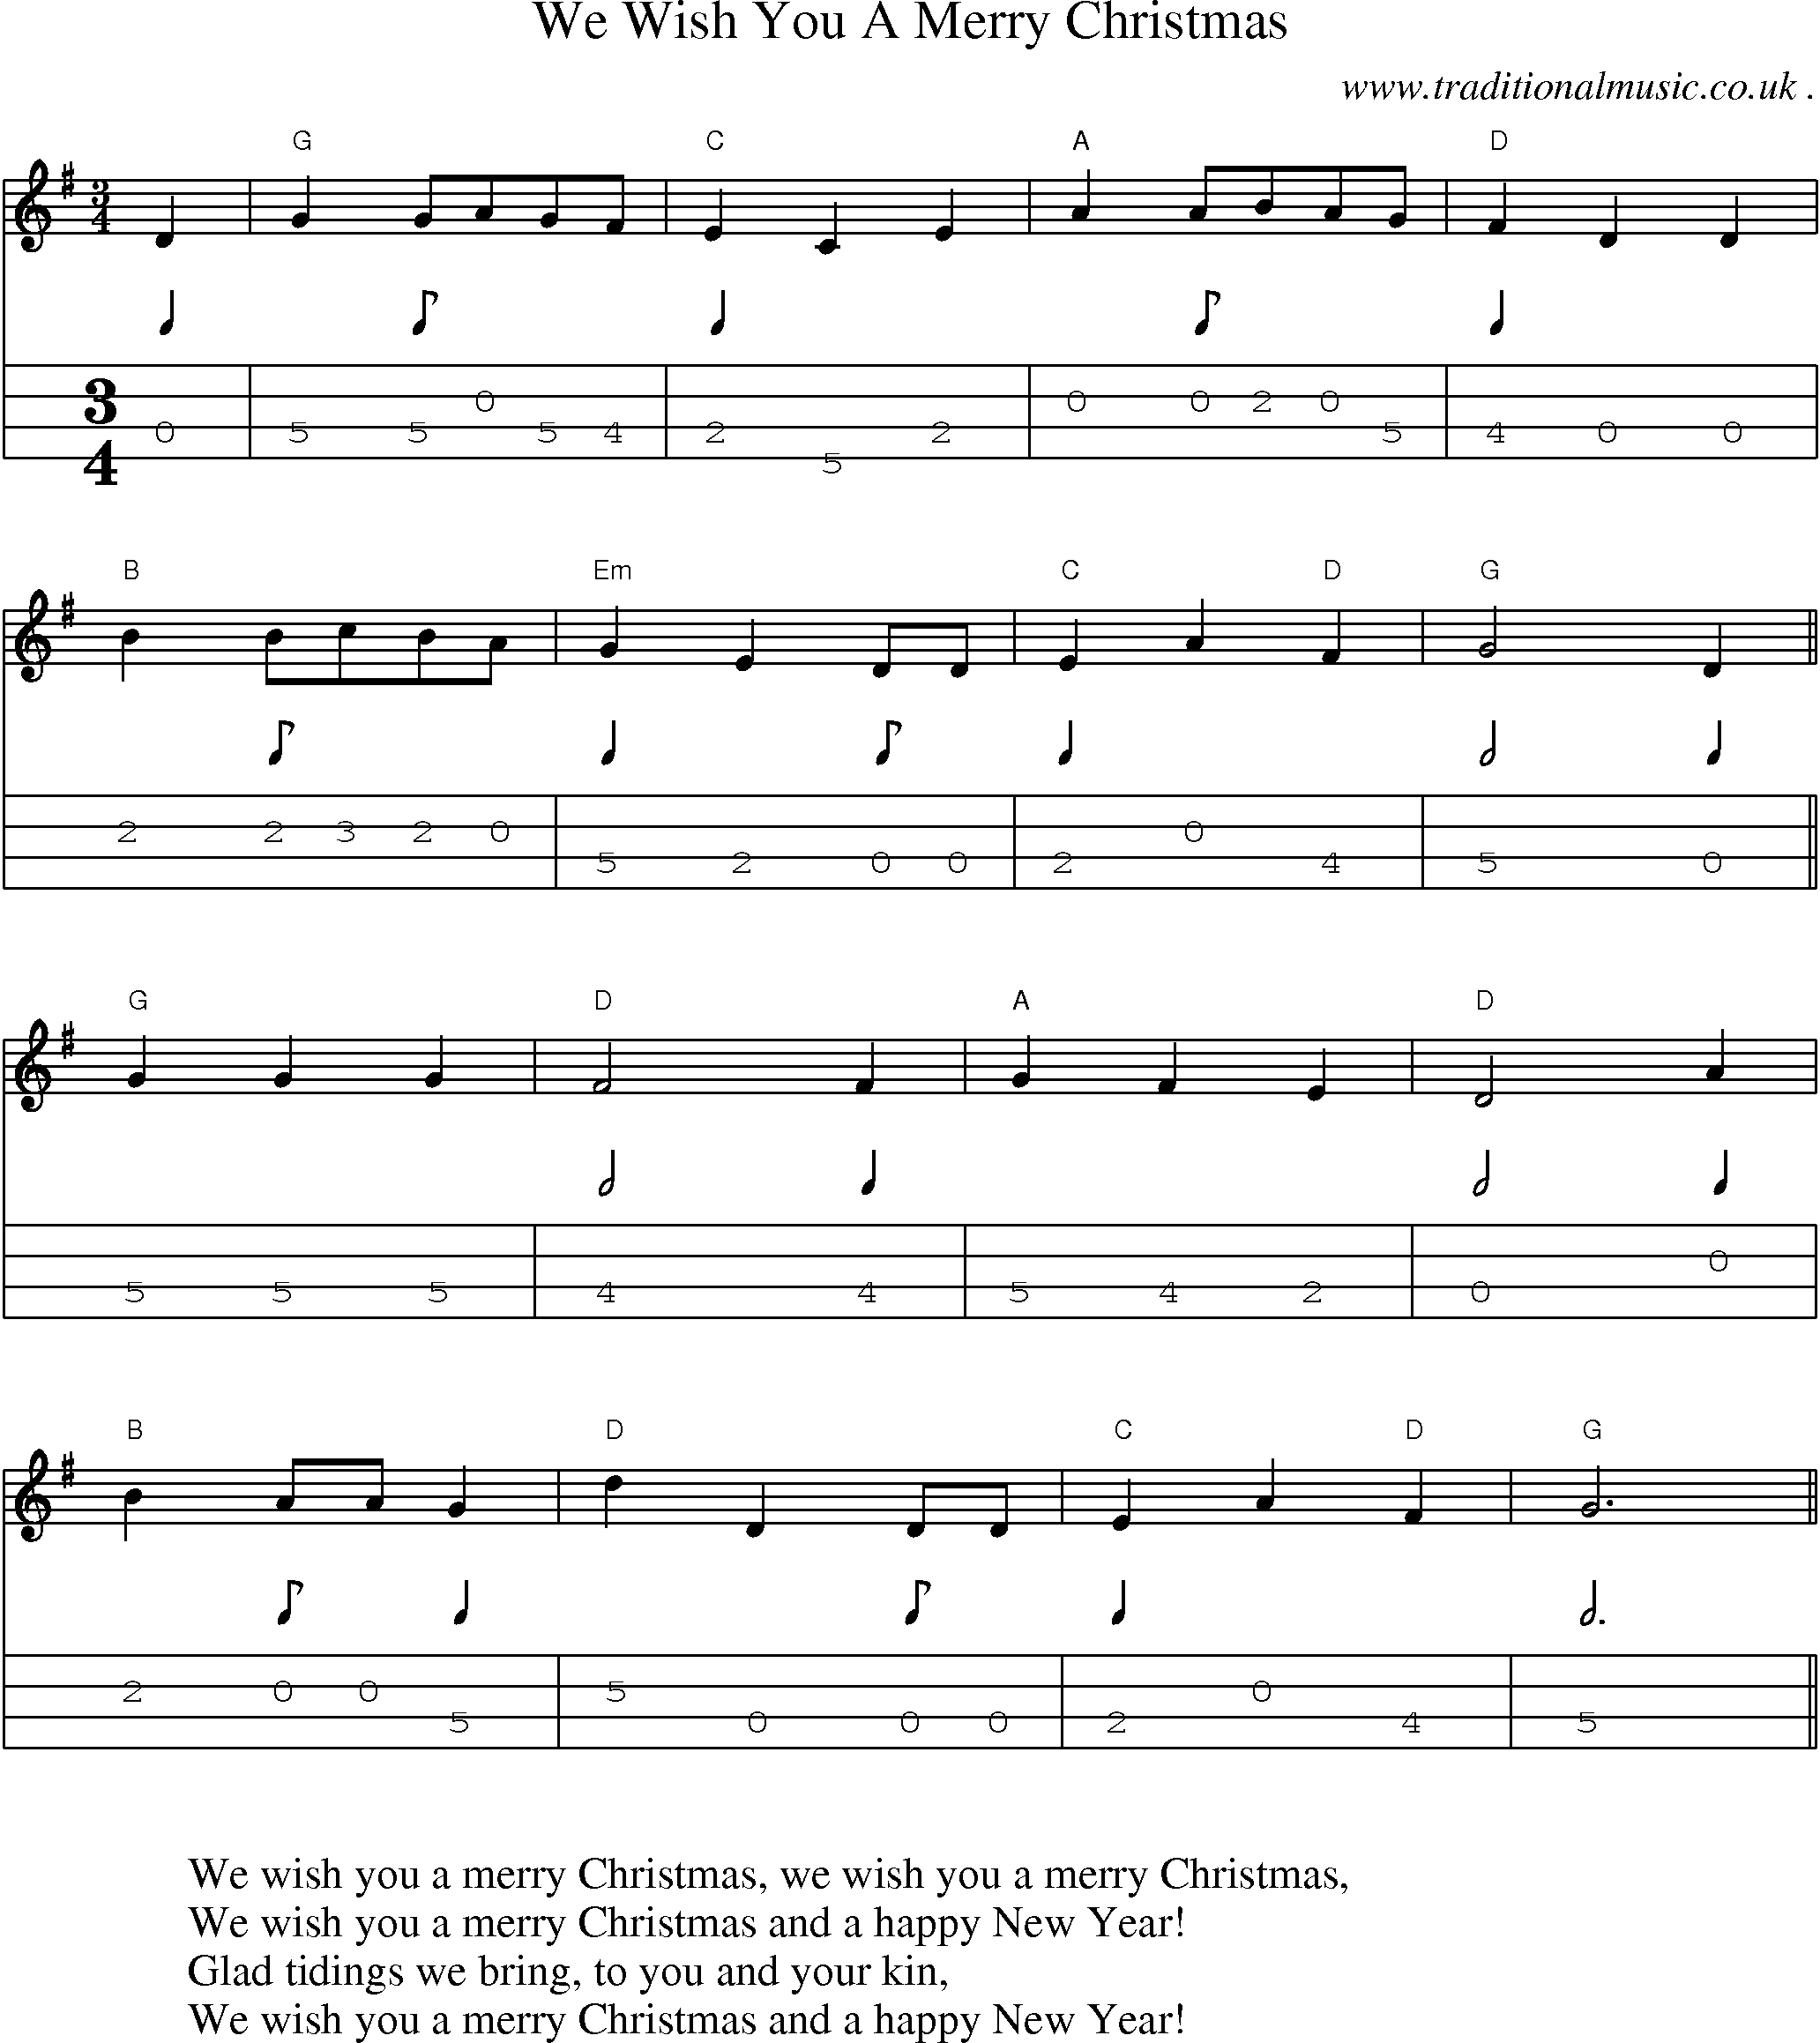 Music Score and Guitar Tabs for We Wish You A Merry Christmas